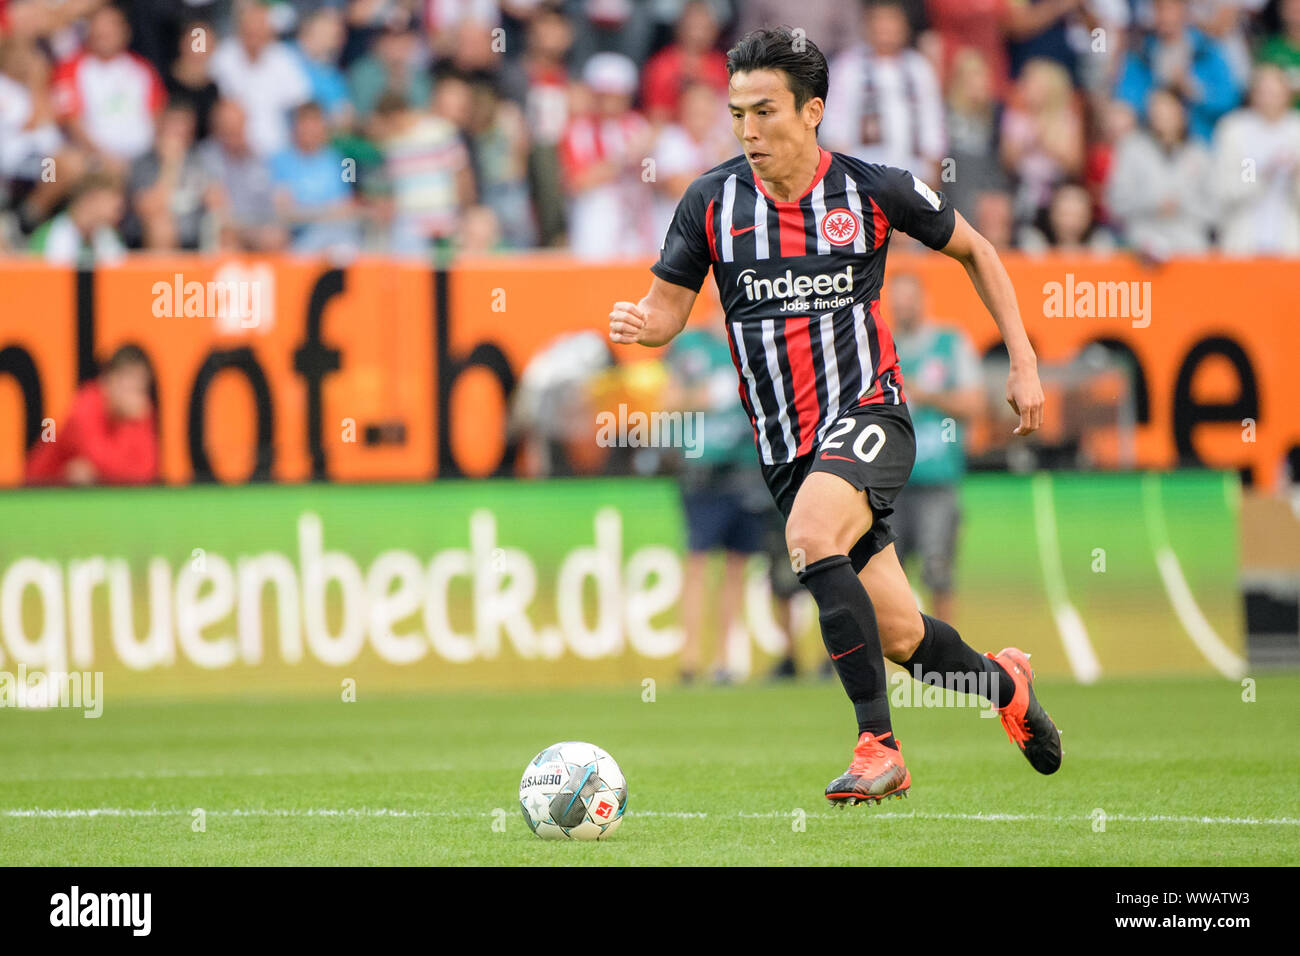 Augsburg, Germany. 14th Sep, 2019. Soccer: Bundesliga, FC Augsburg - Eintracht Frankfurt, 4th matchday in the WWK-Arena. Makoto Hasebe from Frankfurt plays the ball. Credit: Matthias Balk/dpa - IMPORTANT NOTE: In accordance with the requirements of the DFL Deutsche Fußball Liga or the DFB Deutscher Fußball-Bund, it is prohibited to use or have used photographs taken in the stadium and/or the match in the form of sequence images and/or video-like photo sequences./dpa/Alamy Live News Stock Photo